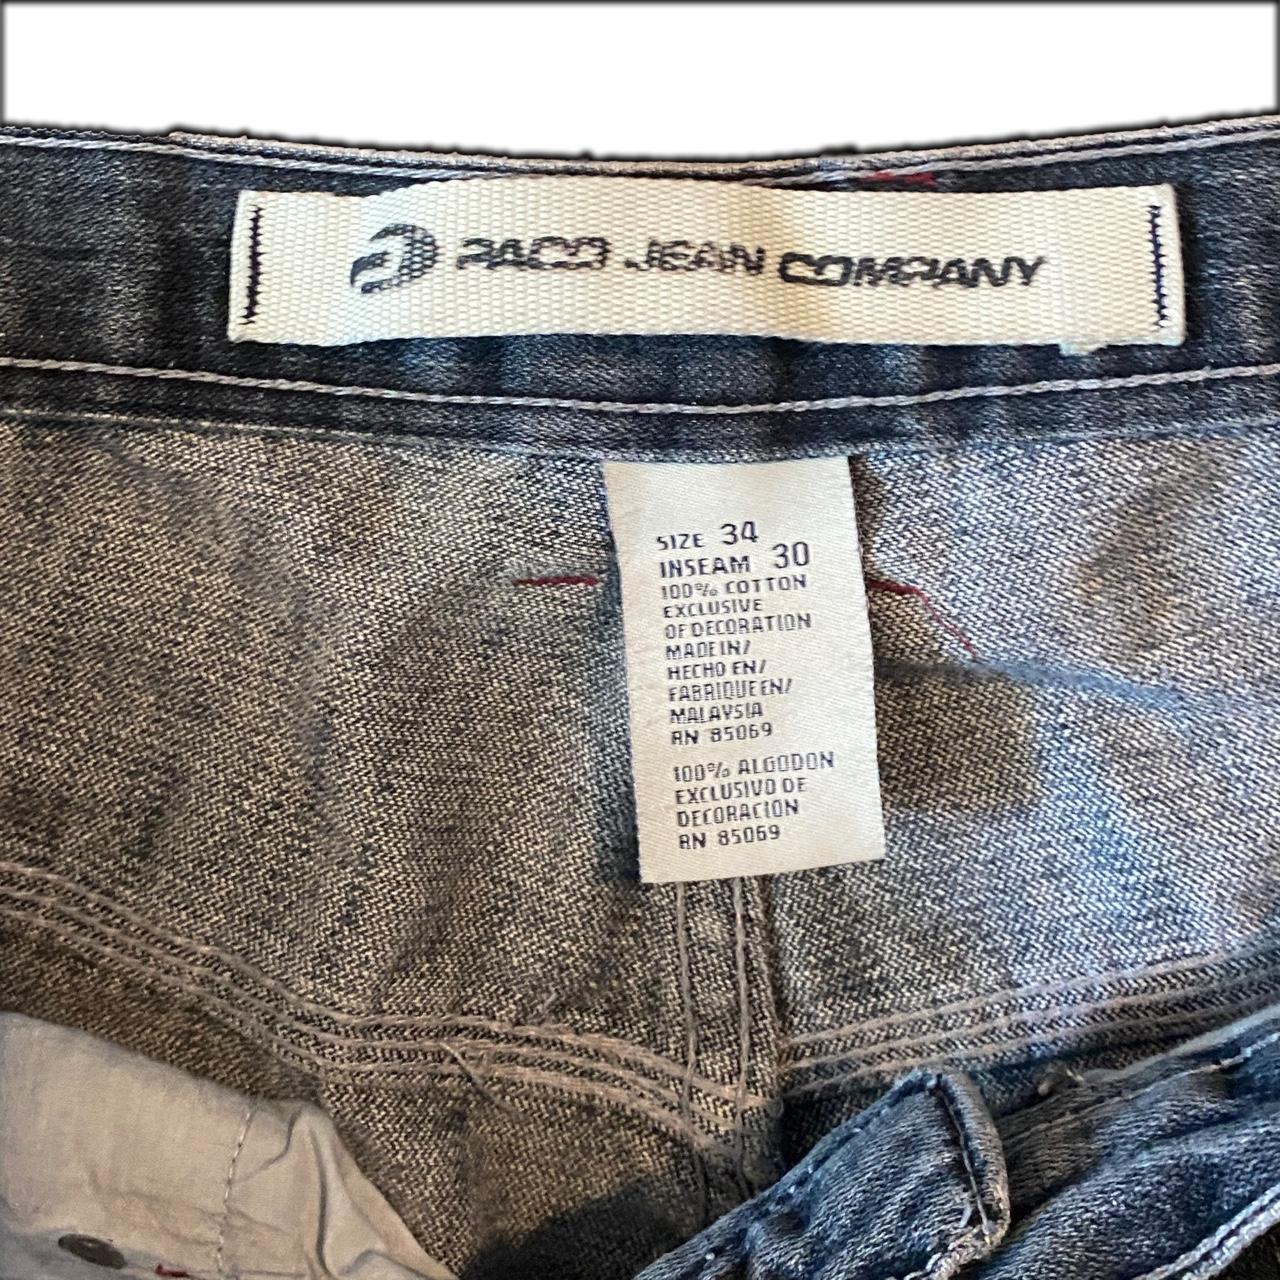 Paco Men's Navy and Blue Jeans | Depop